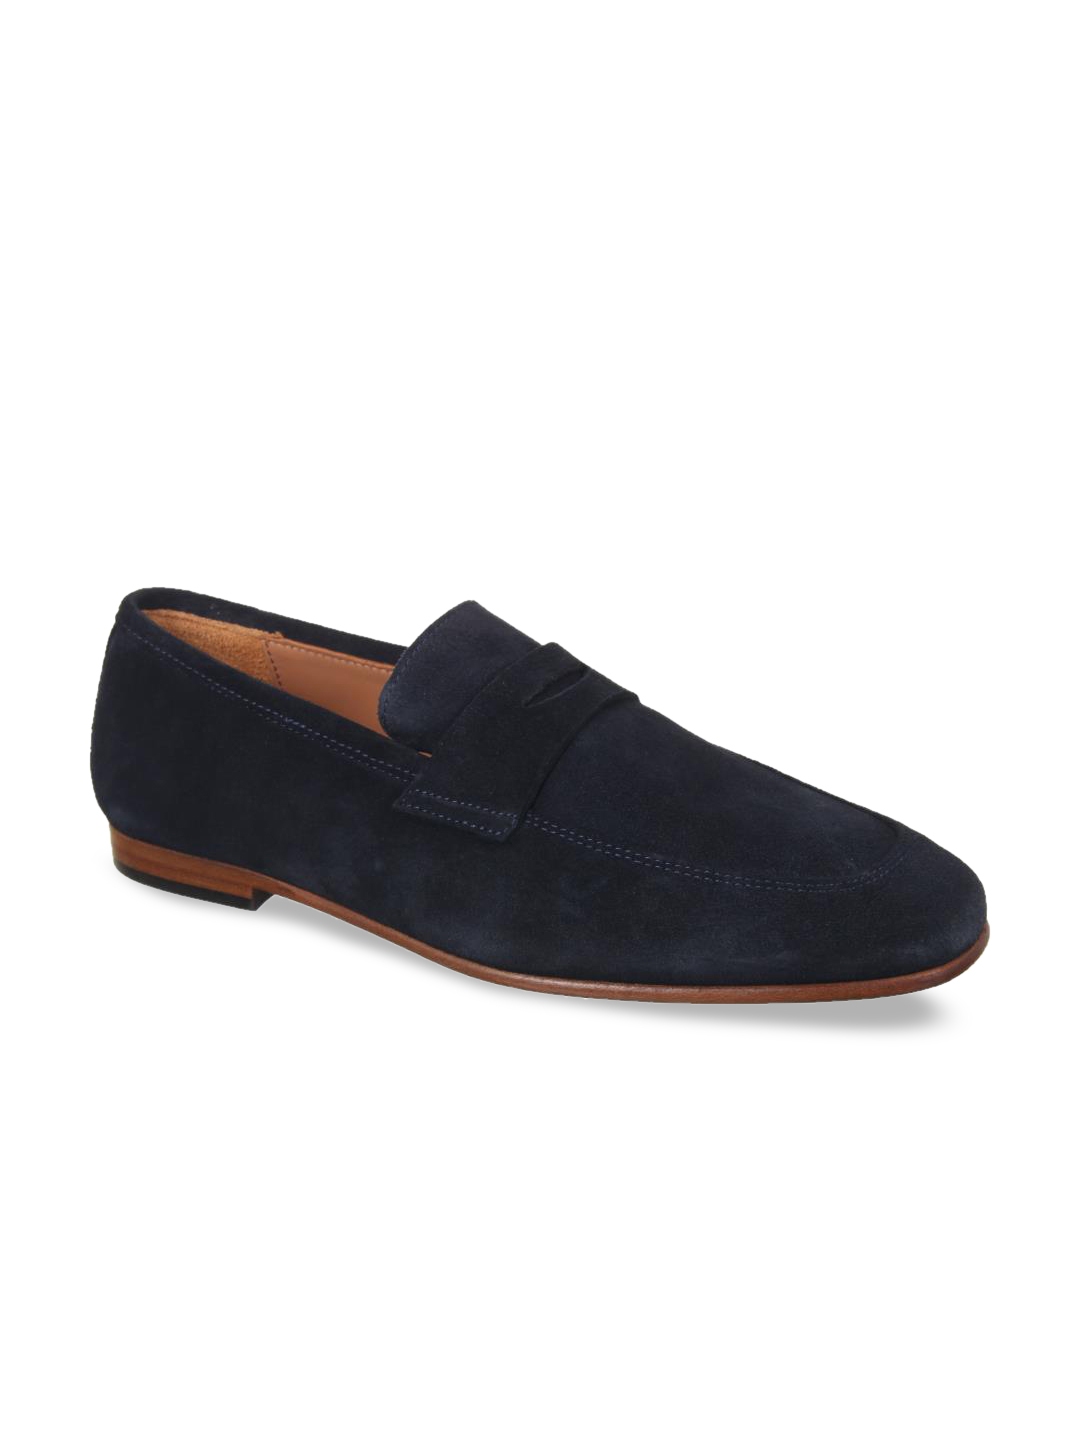 Buy Clarks Men Navy Blue Leather Loafers - Casual Shoes for Men 9488611 ...